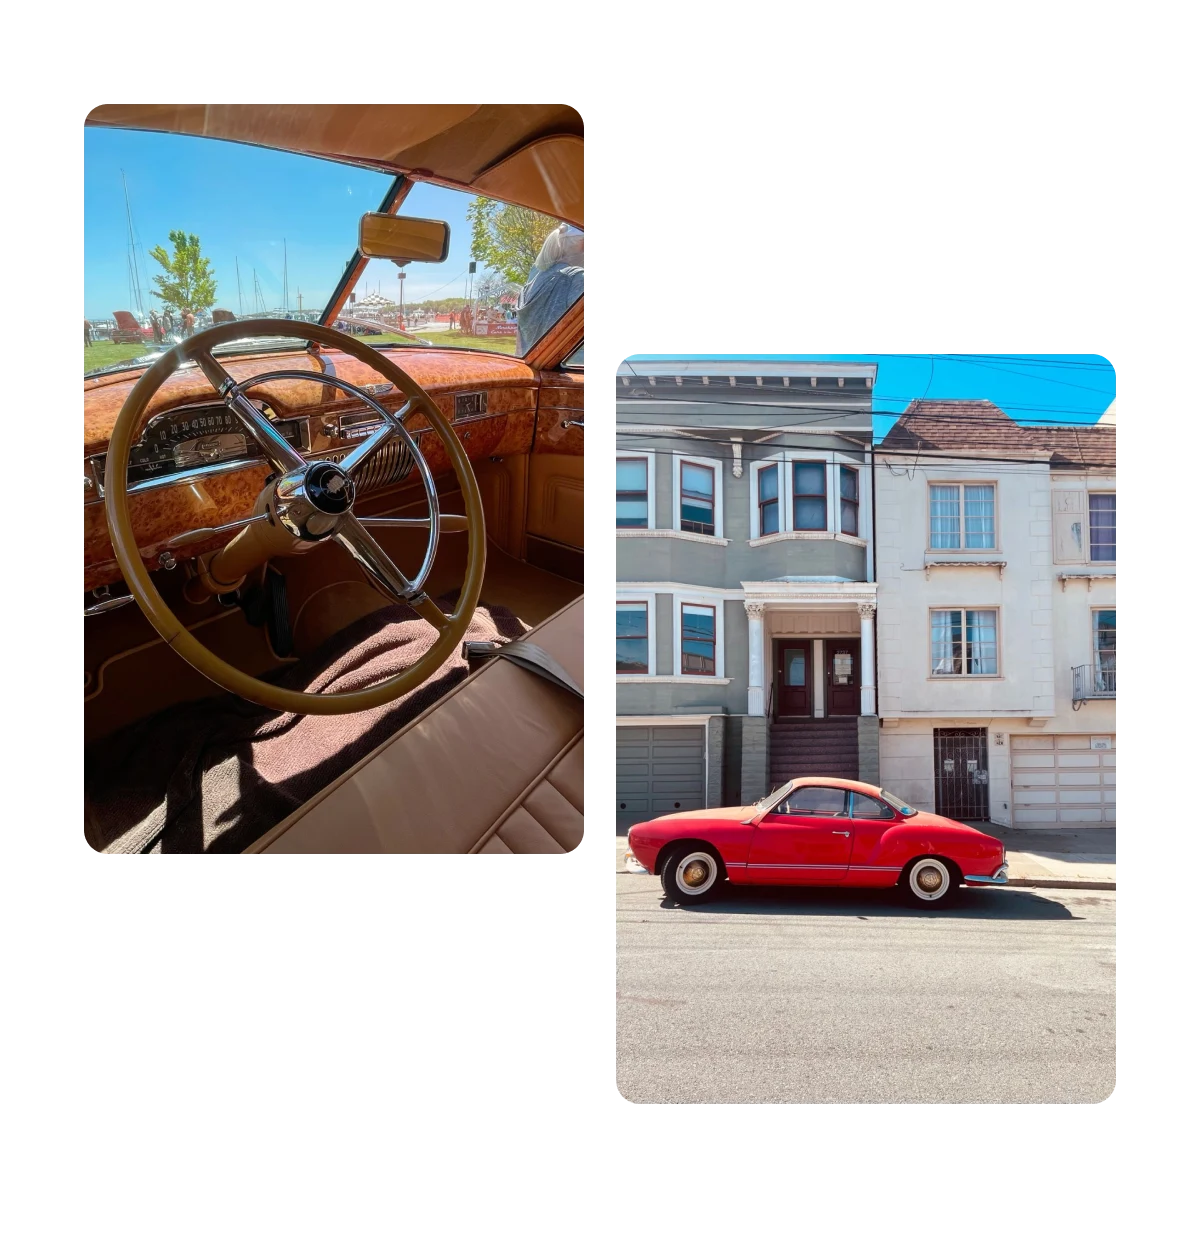 Two pins, interior of old car, exterior of old car